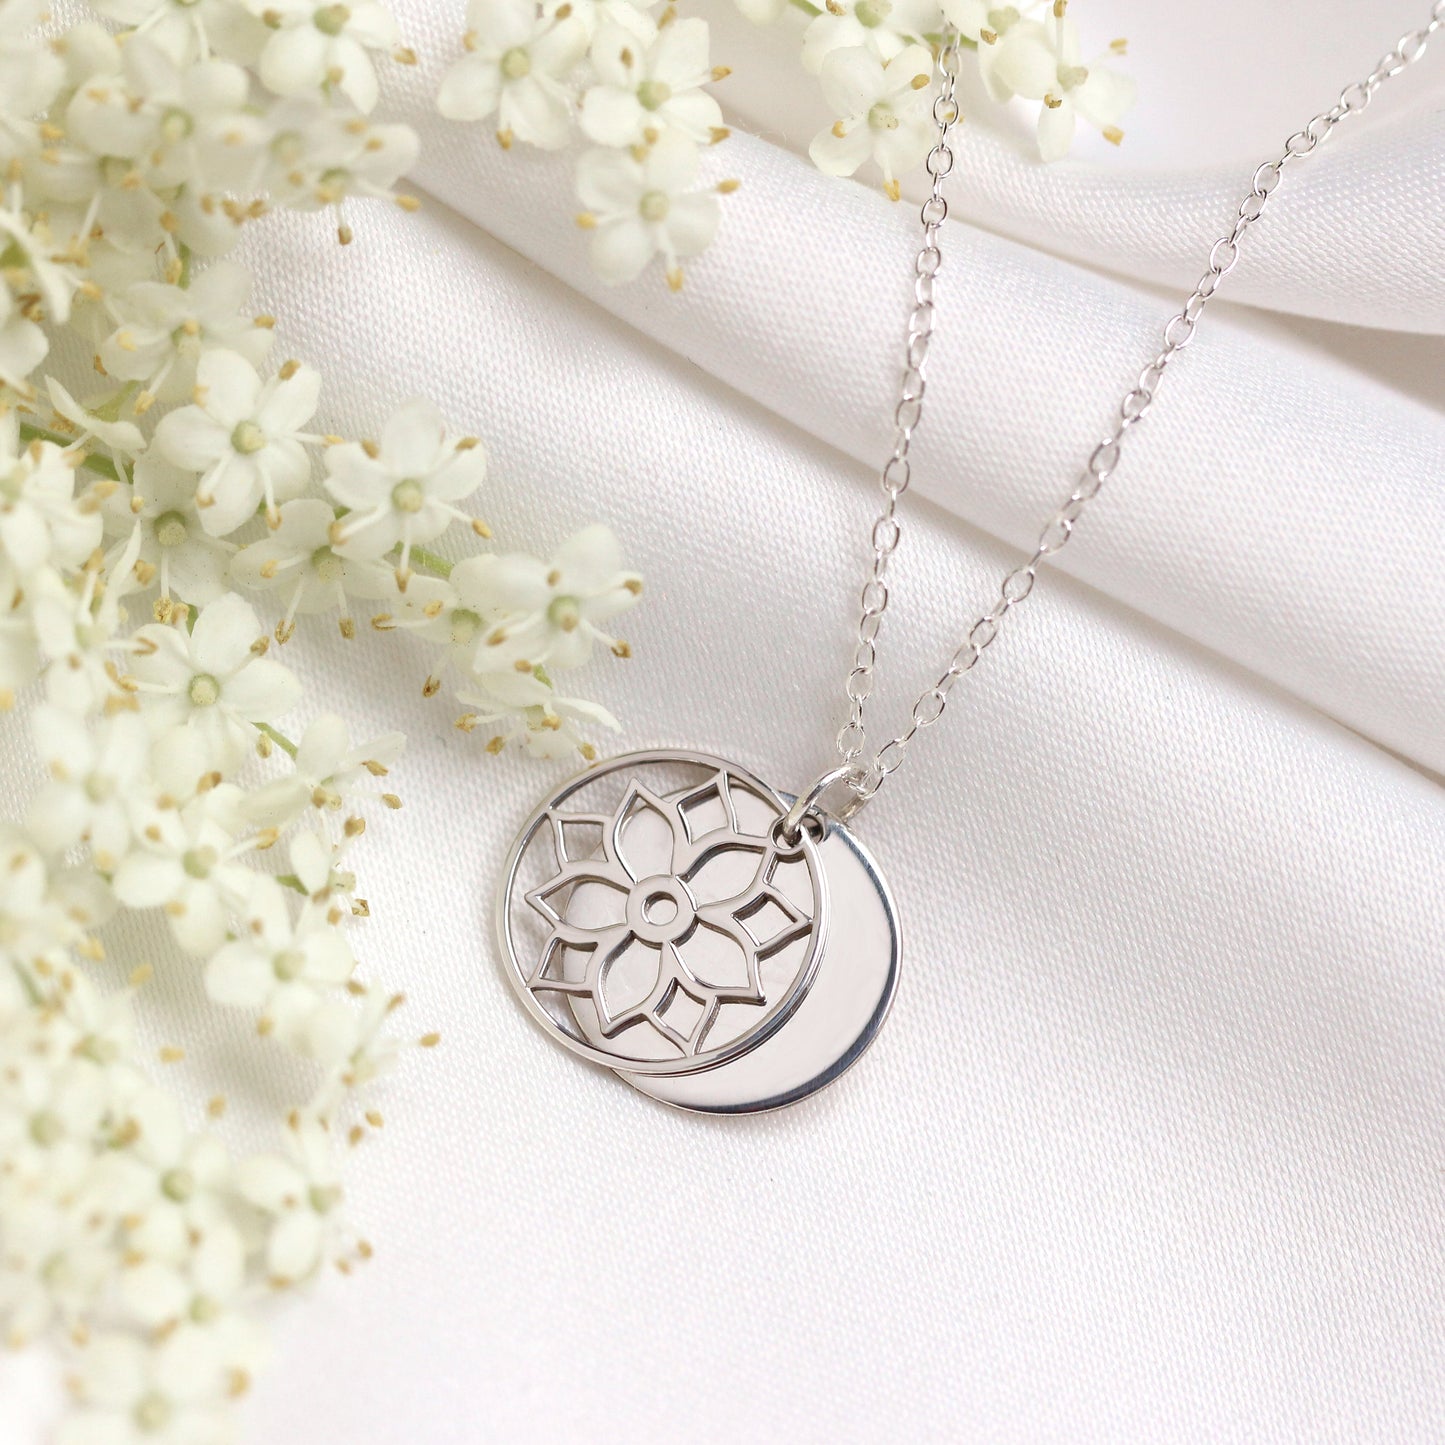 Sterling Silver December Poinsettia Birth Flower & 13mm Engravable Tag Necklace 14 - 22 Inches